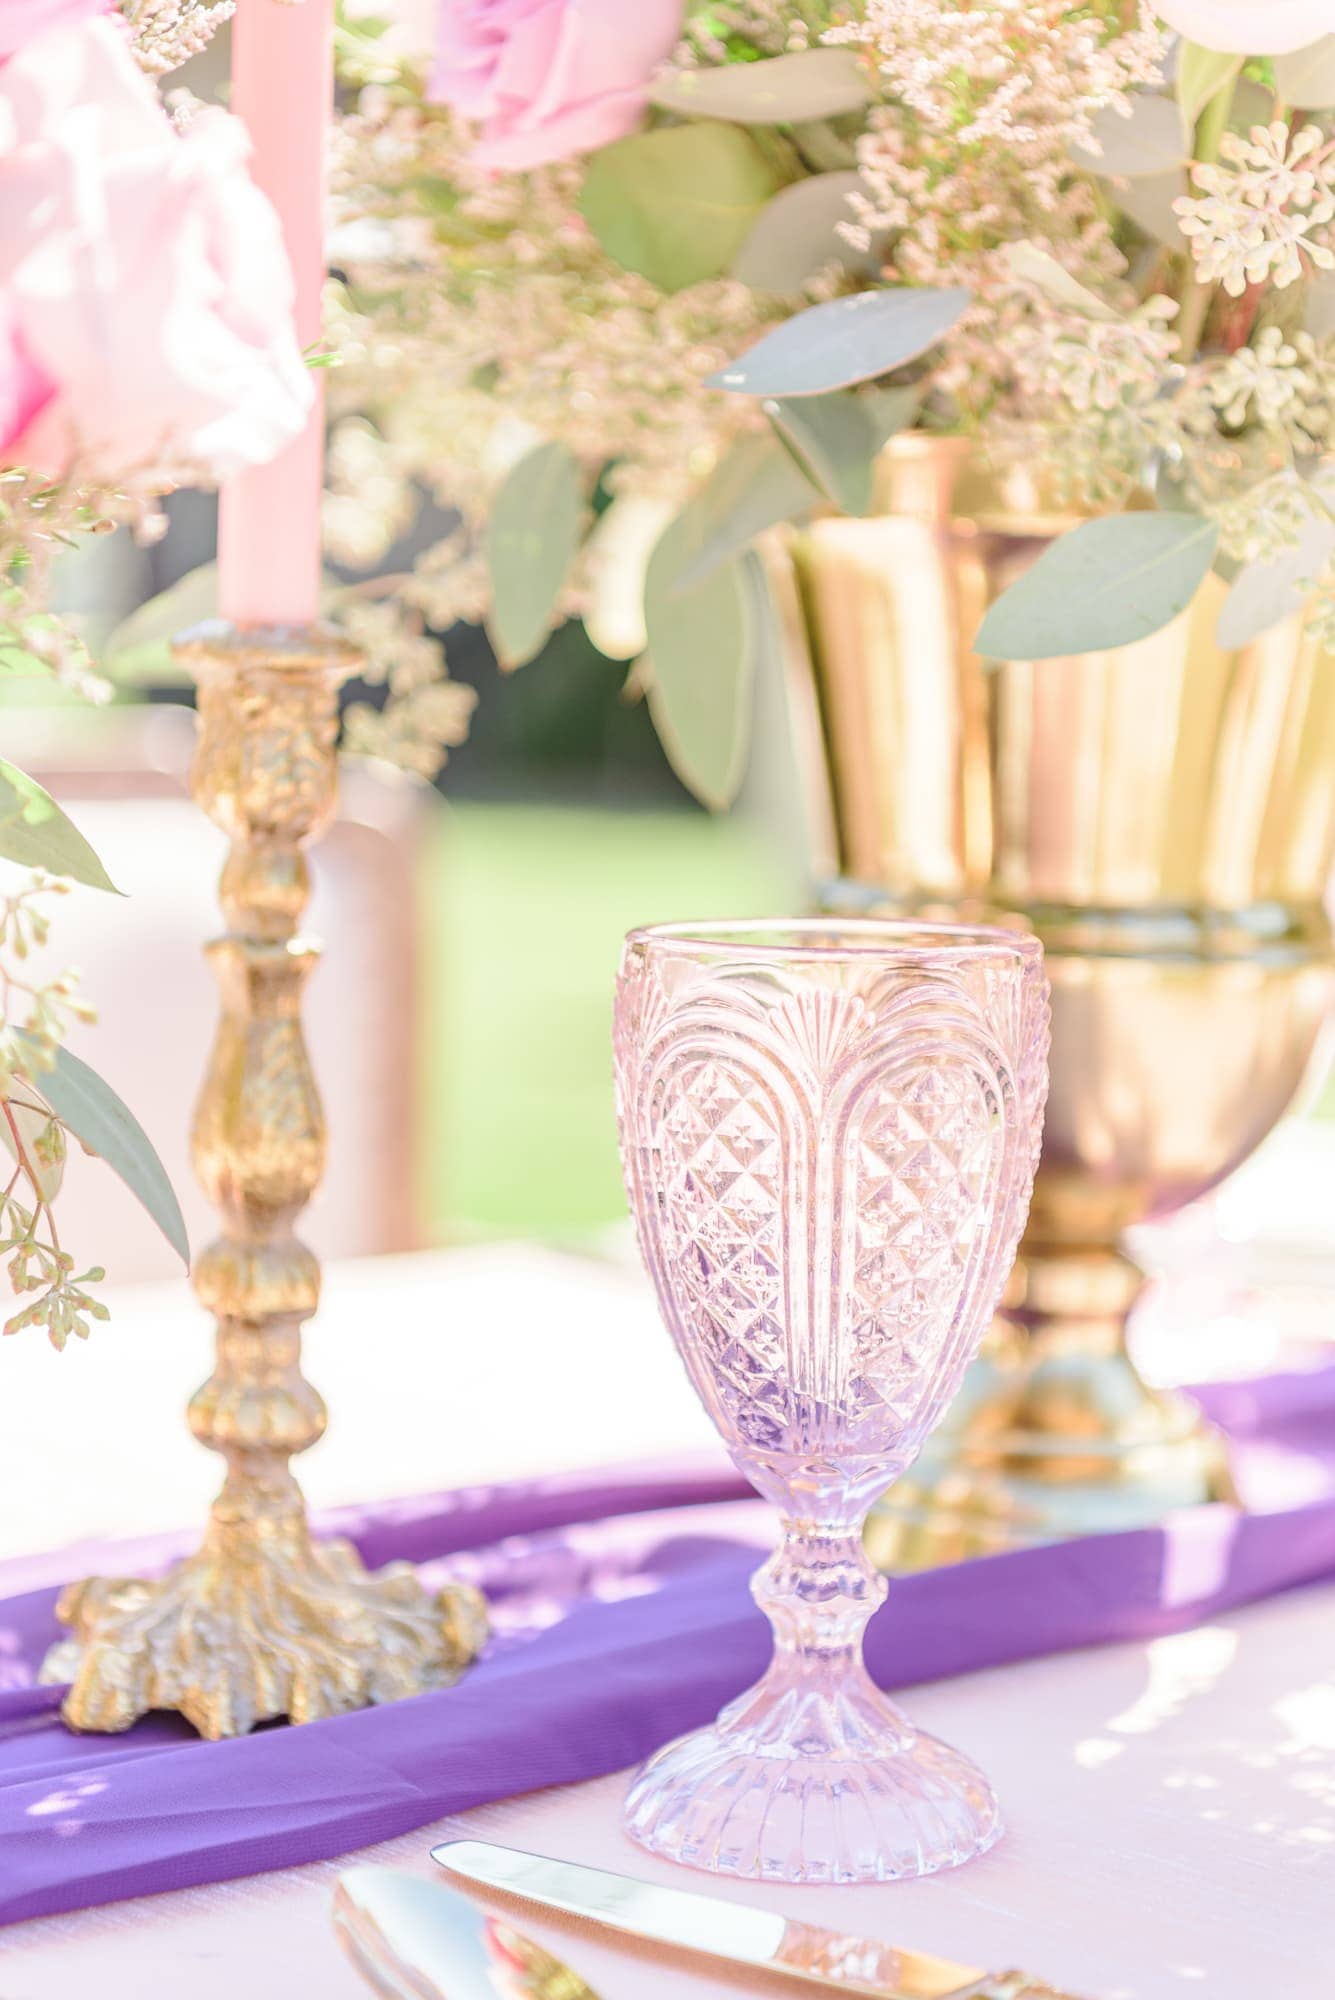 This ornate purple glass fit the princess theme here at Key Rose Estate- a castle venue in North Carolina.